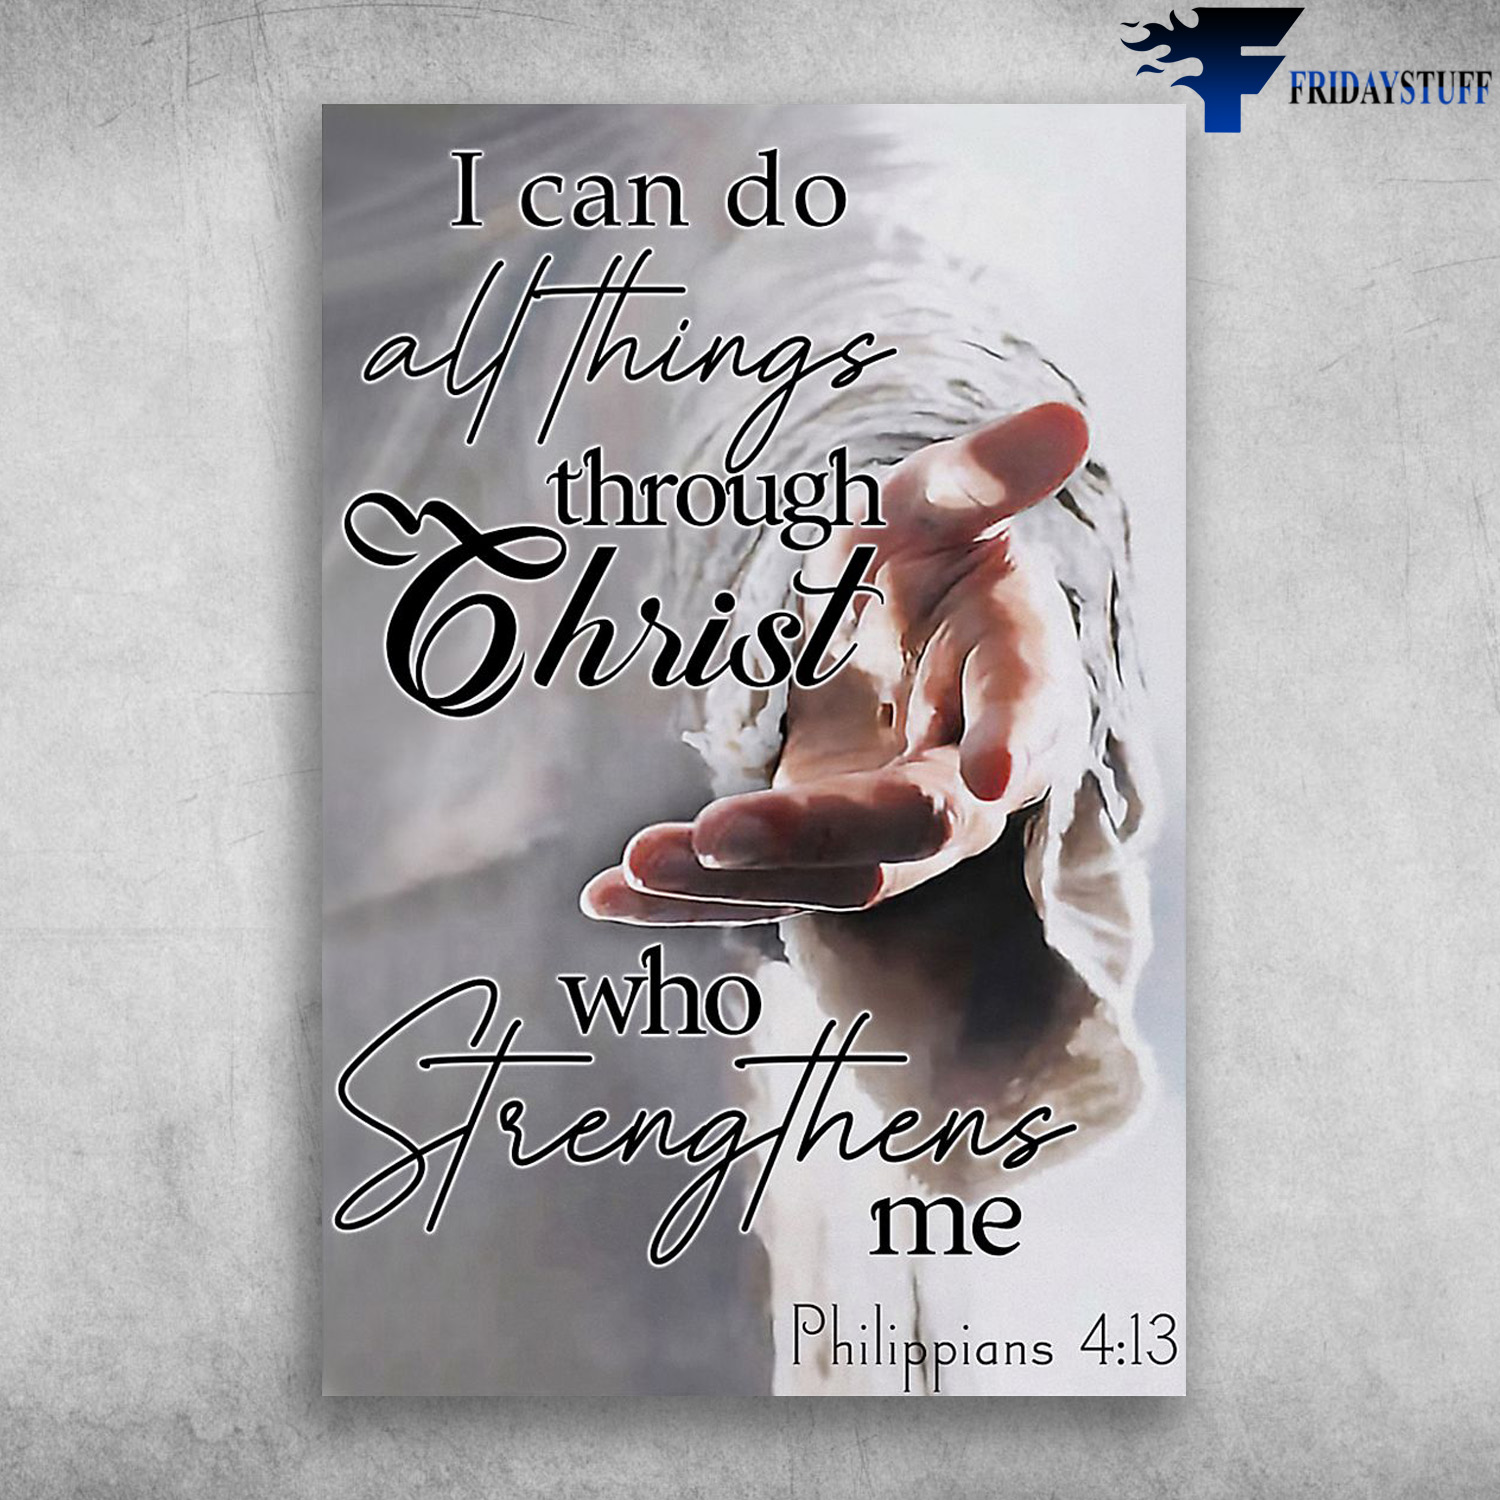 God Hand - I Can Do All Things Through Christ, Who Strengthens Me